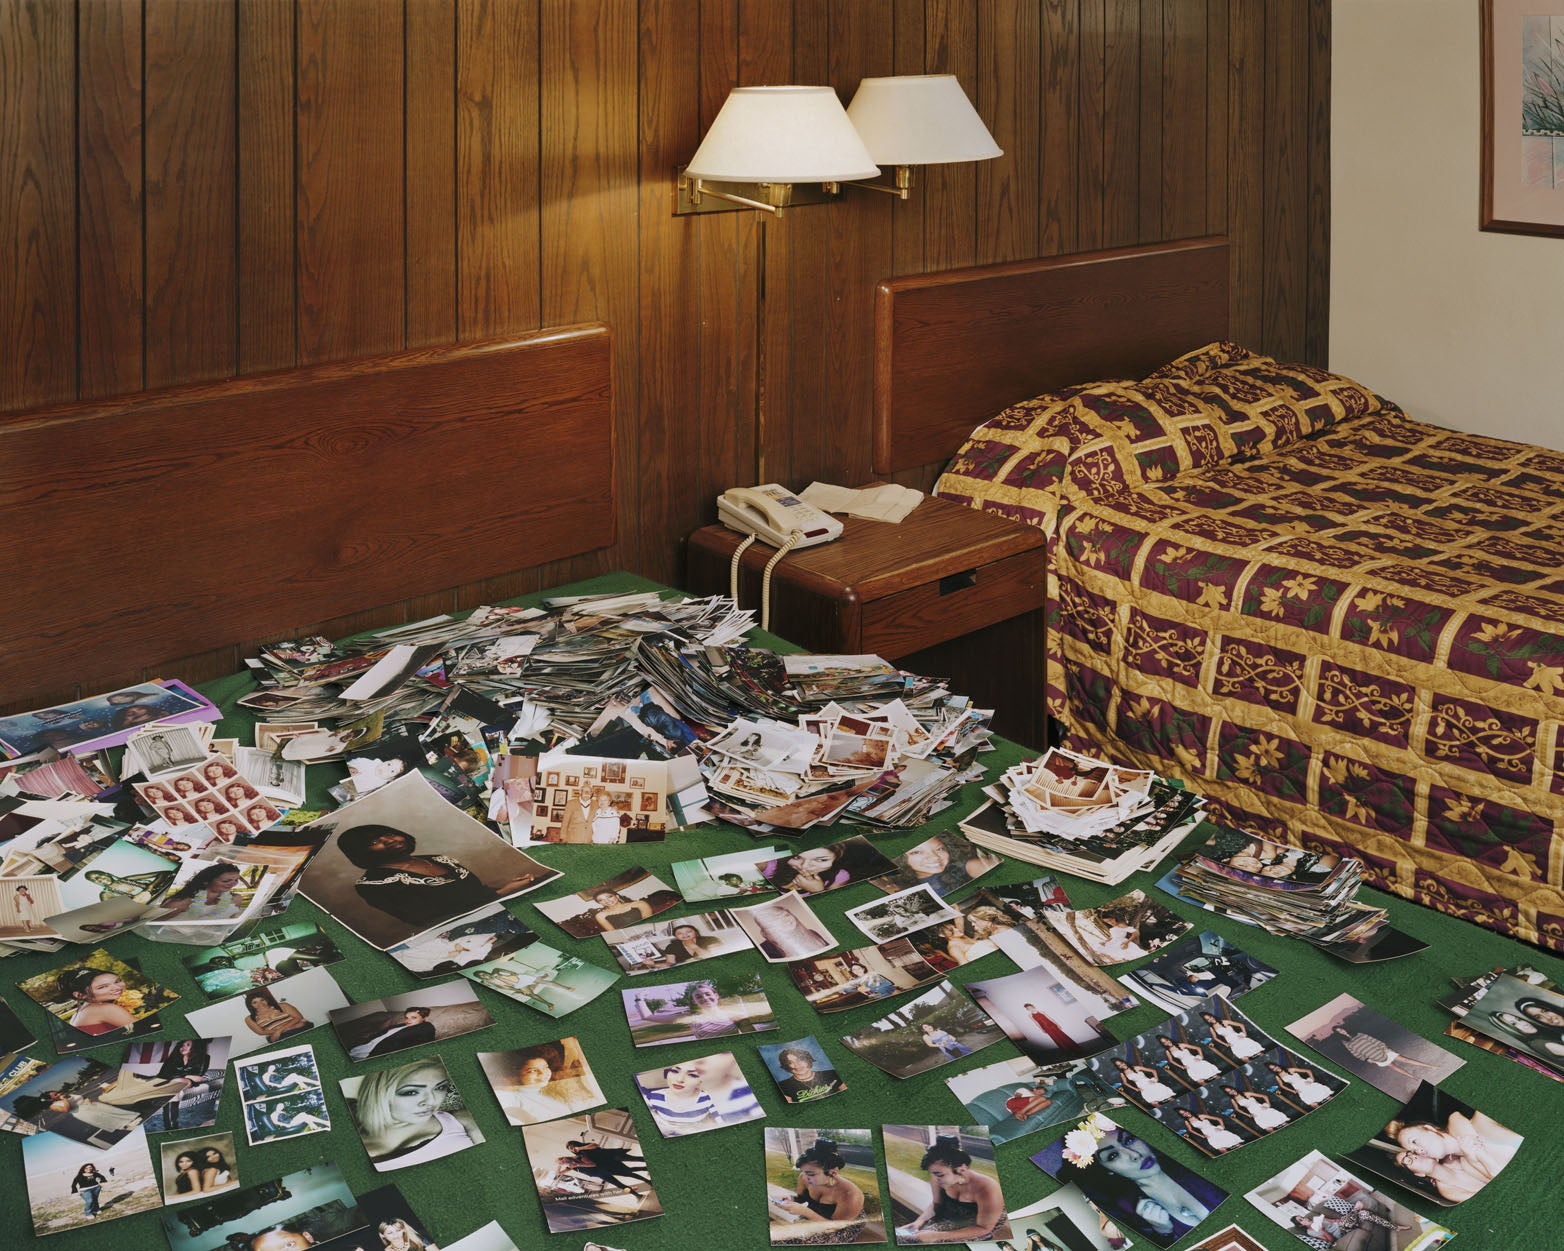 A motel room filled with photo prints.